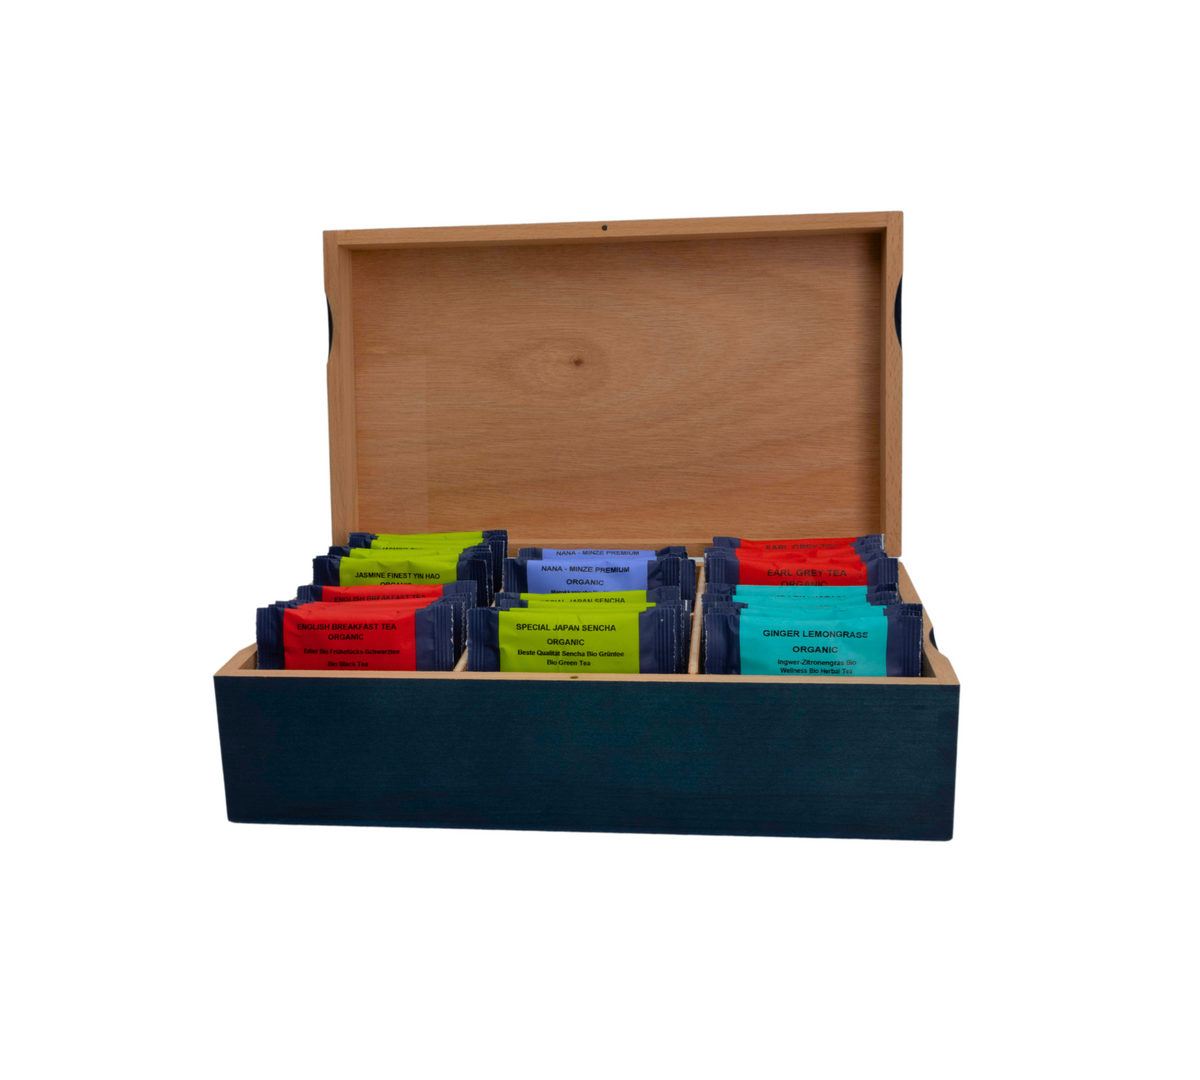 Wooden box with standard teas